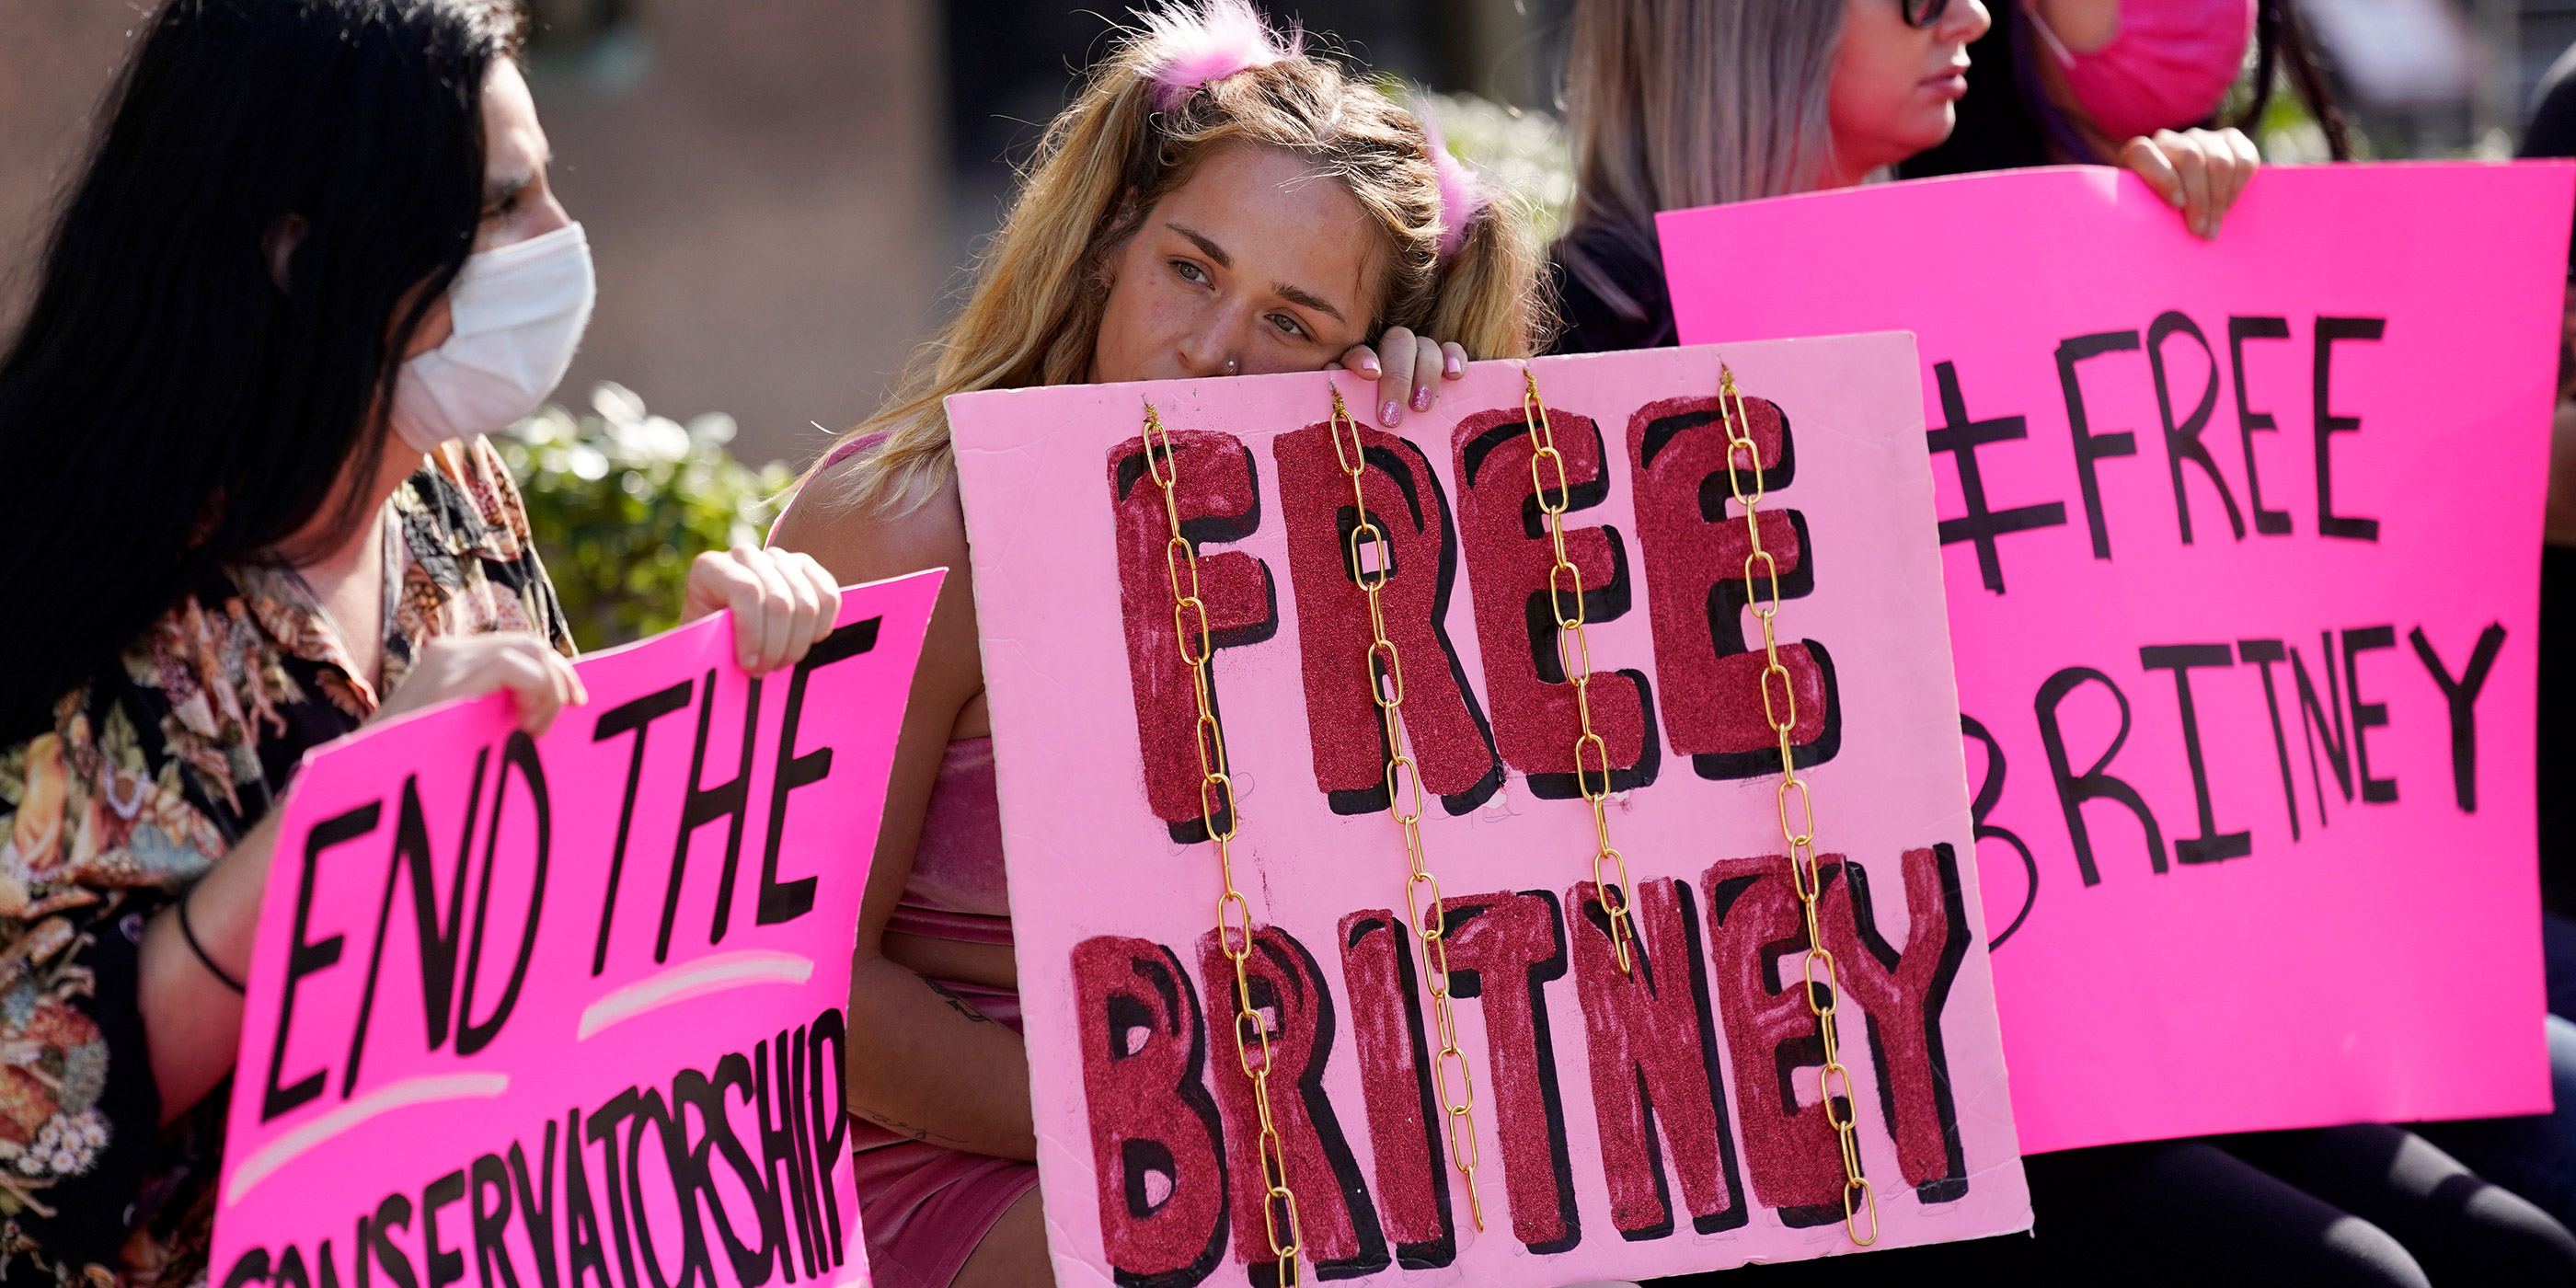 Britney Spears supporters sit outside a court hearing holding signs reading “End The Conservatorship,” and “Free Britney.”